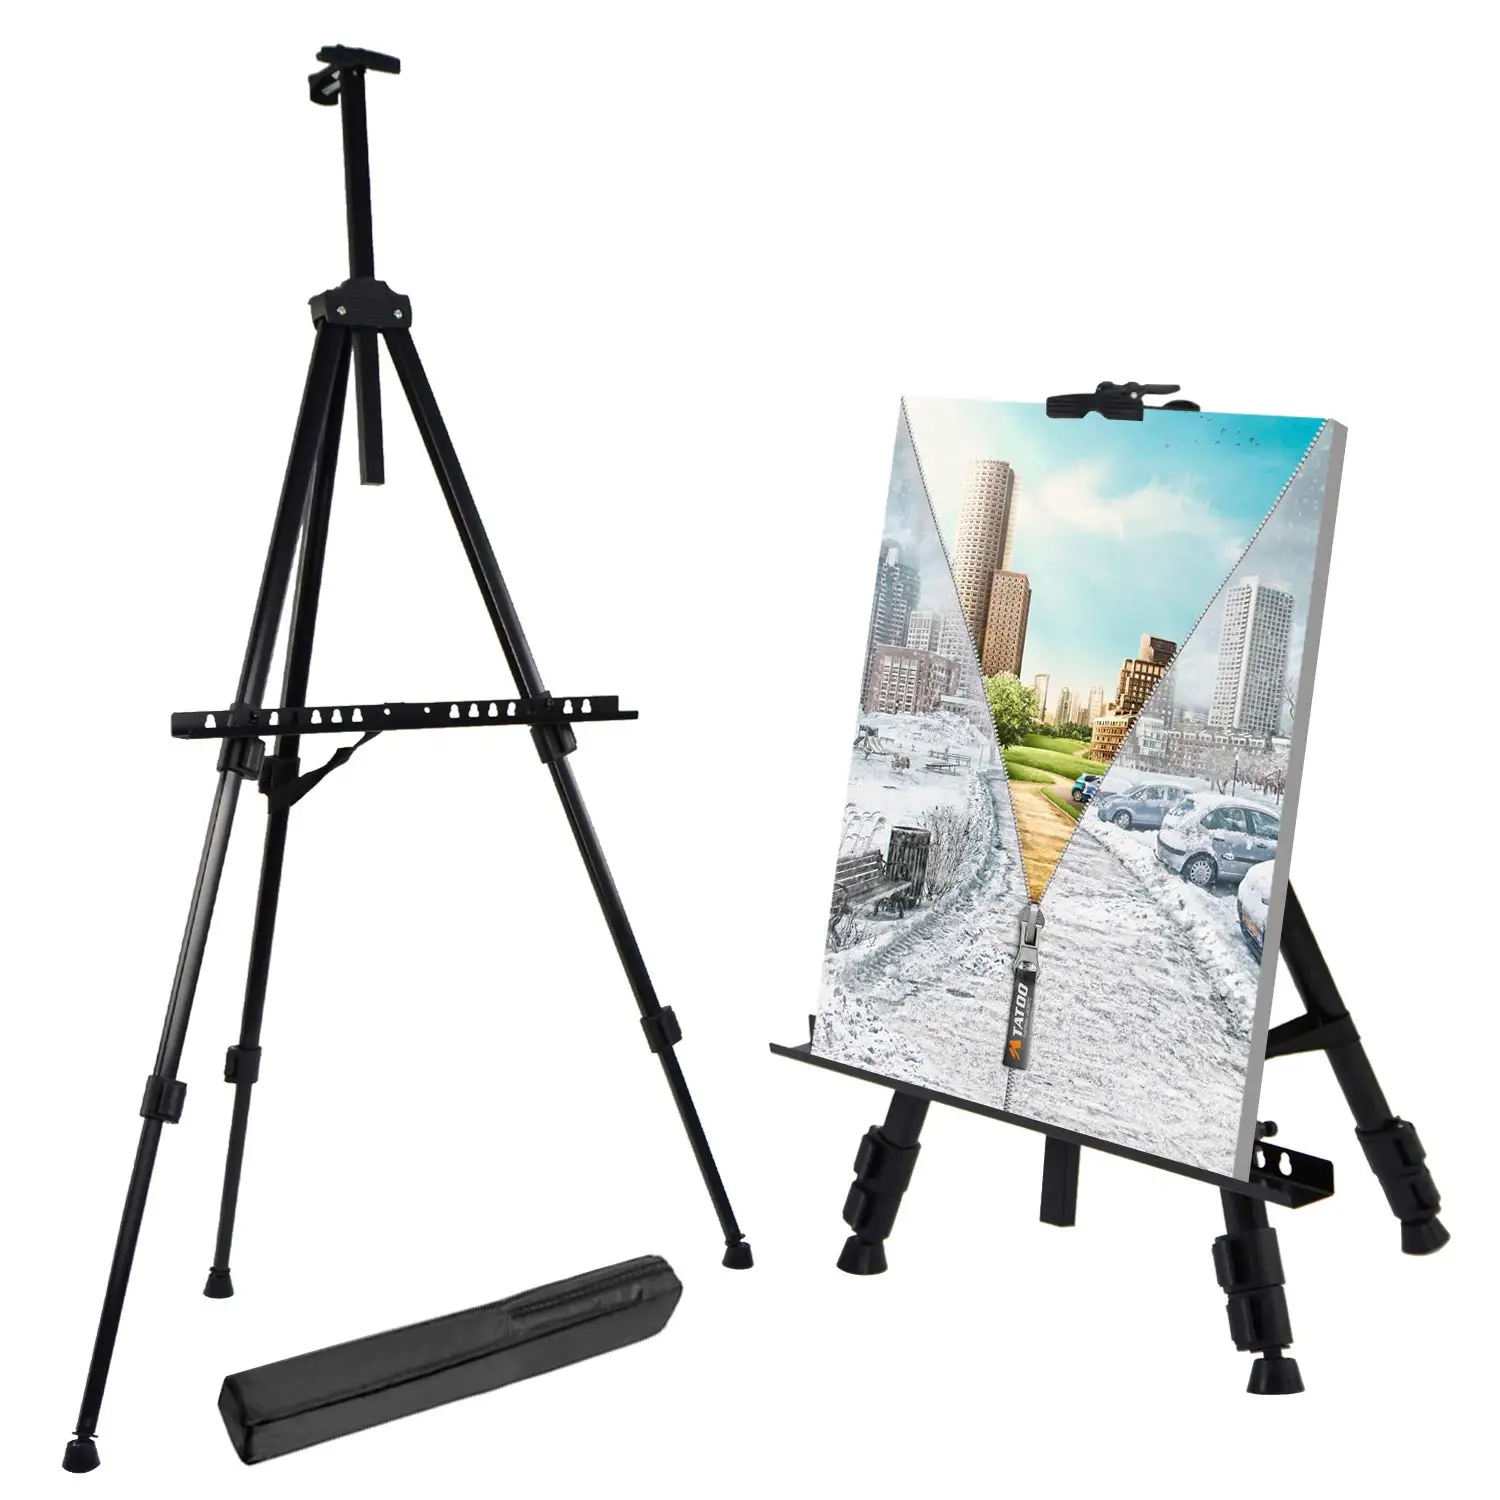 Canvas Board Art Stand For Painting Extra Thick Aluminum Metal Tripod Display Easel 21 προς την 66 Inches Adjustable Height